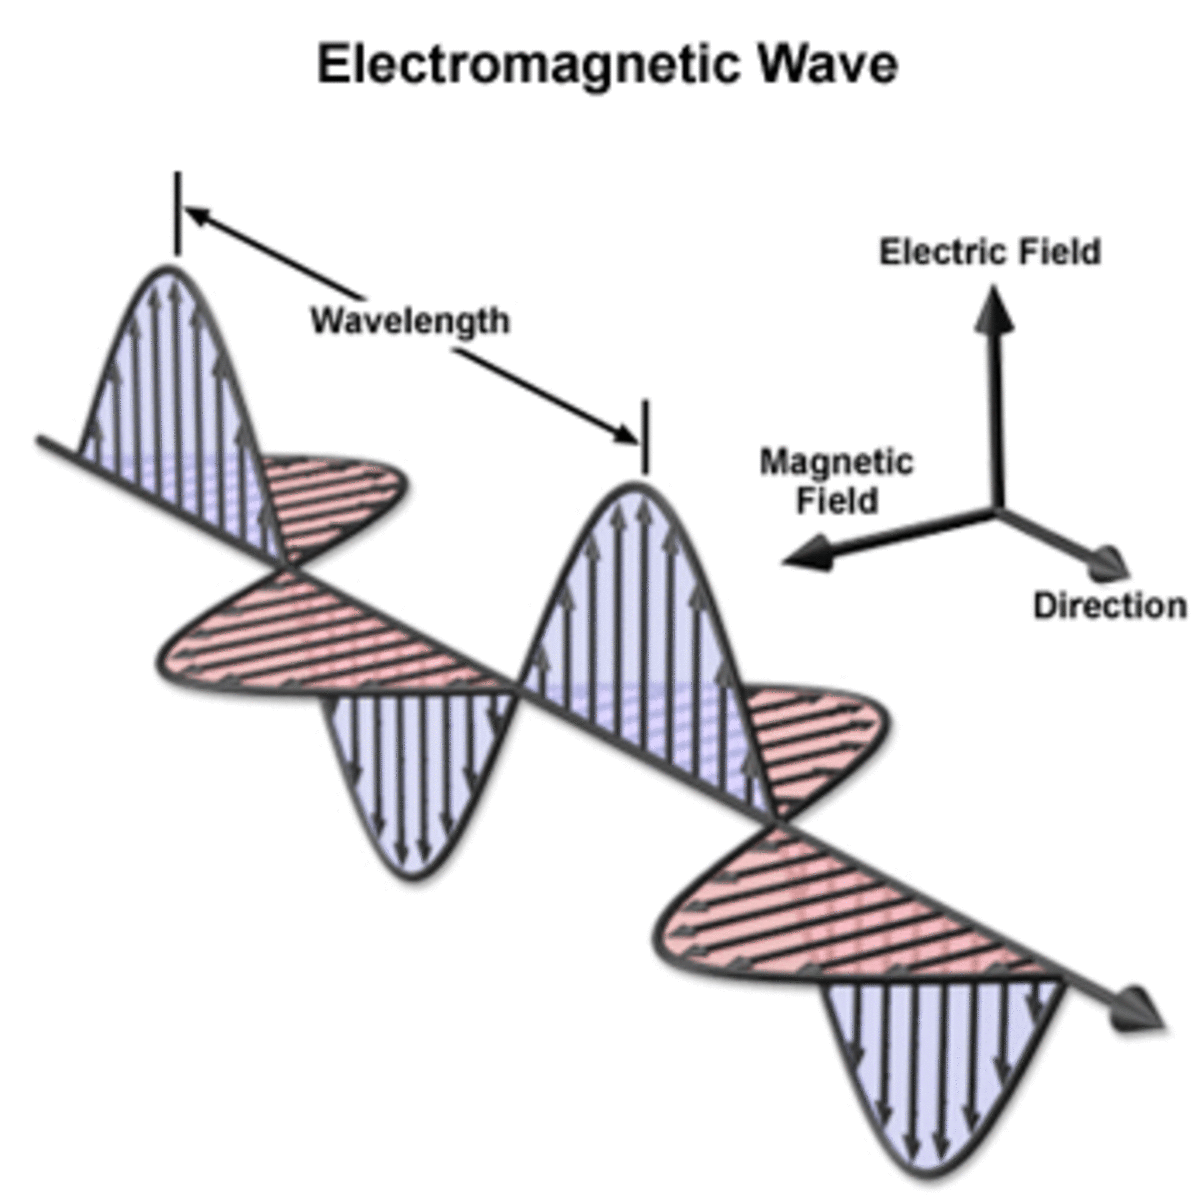 The Basis of Electromagnetic Interference (EMI): Electromagnetism